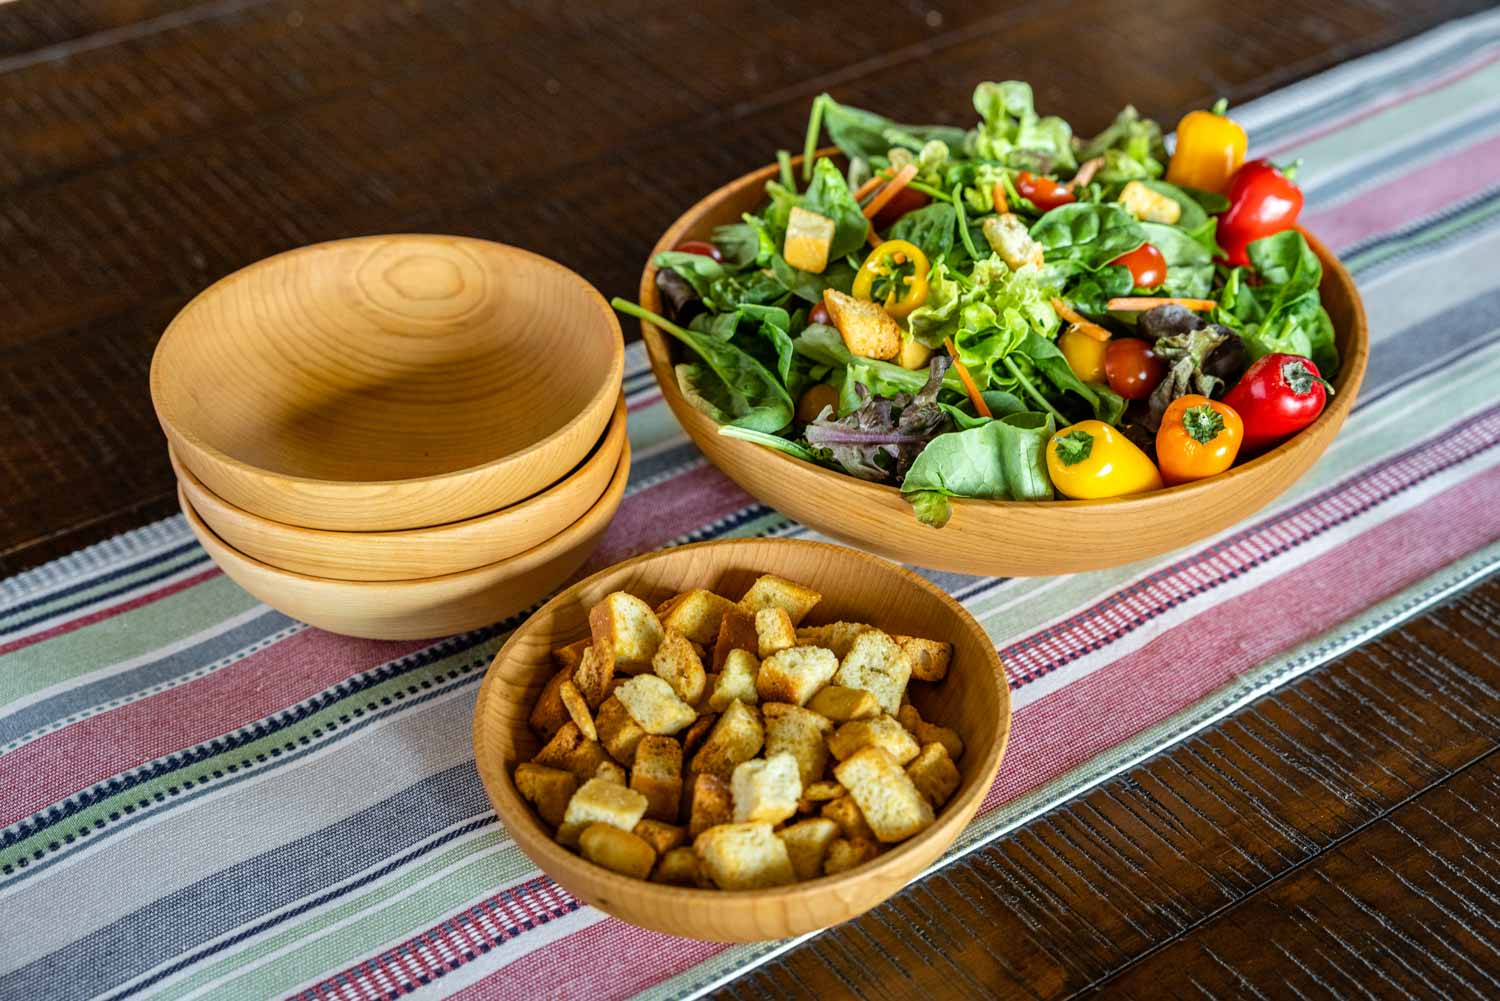 wooden salad bowls on table with runner